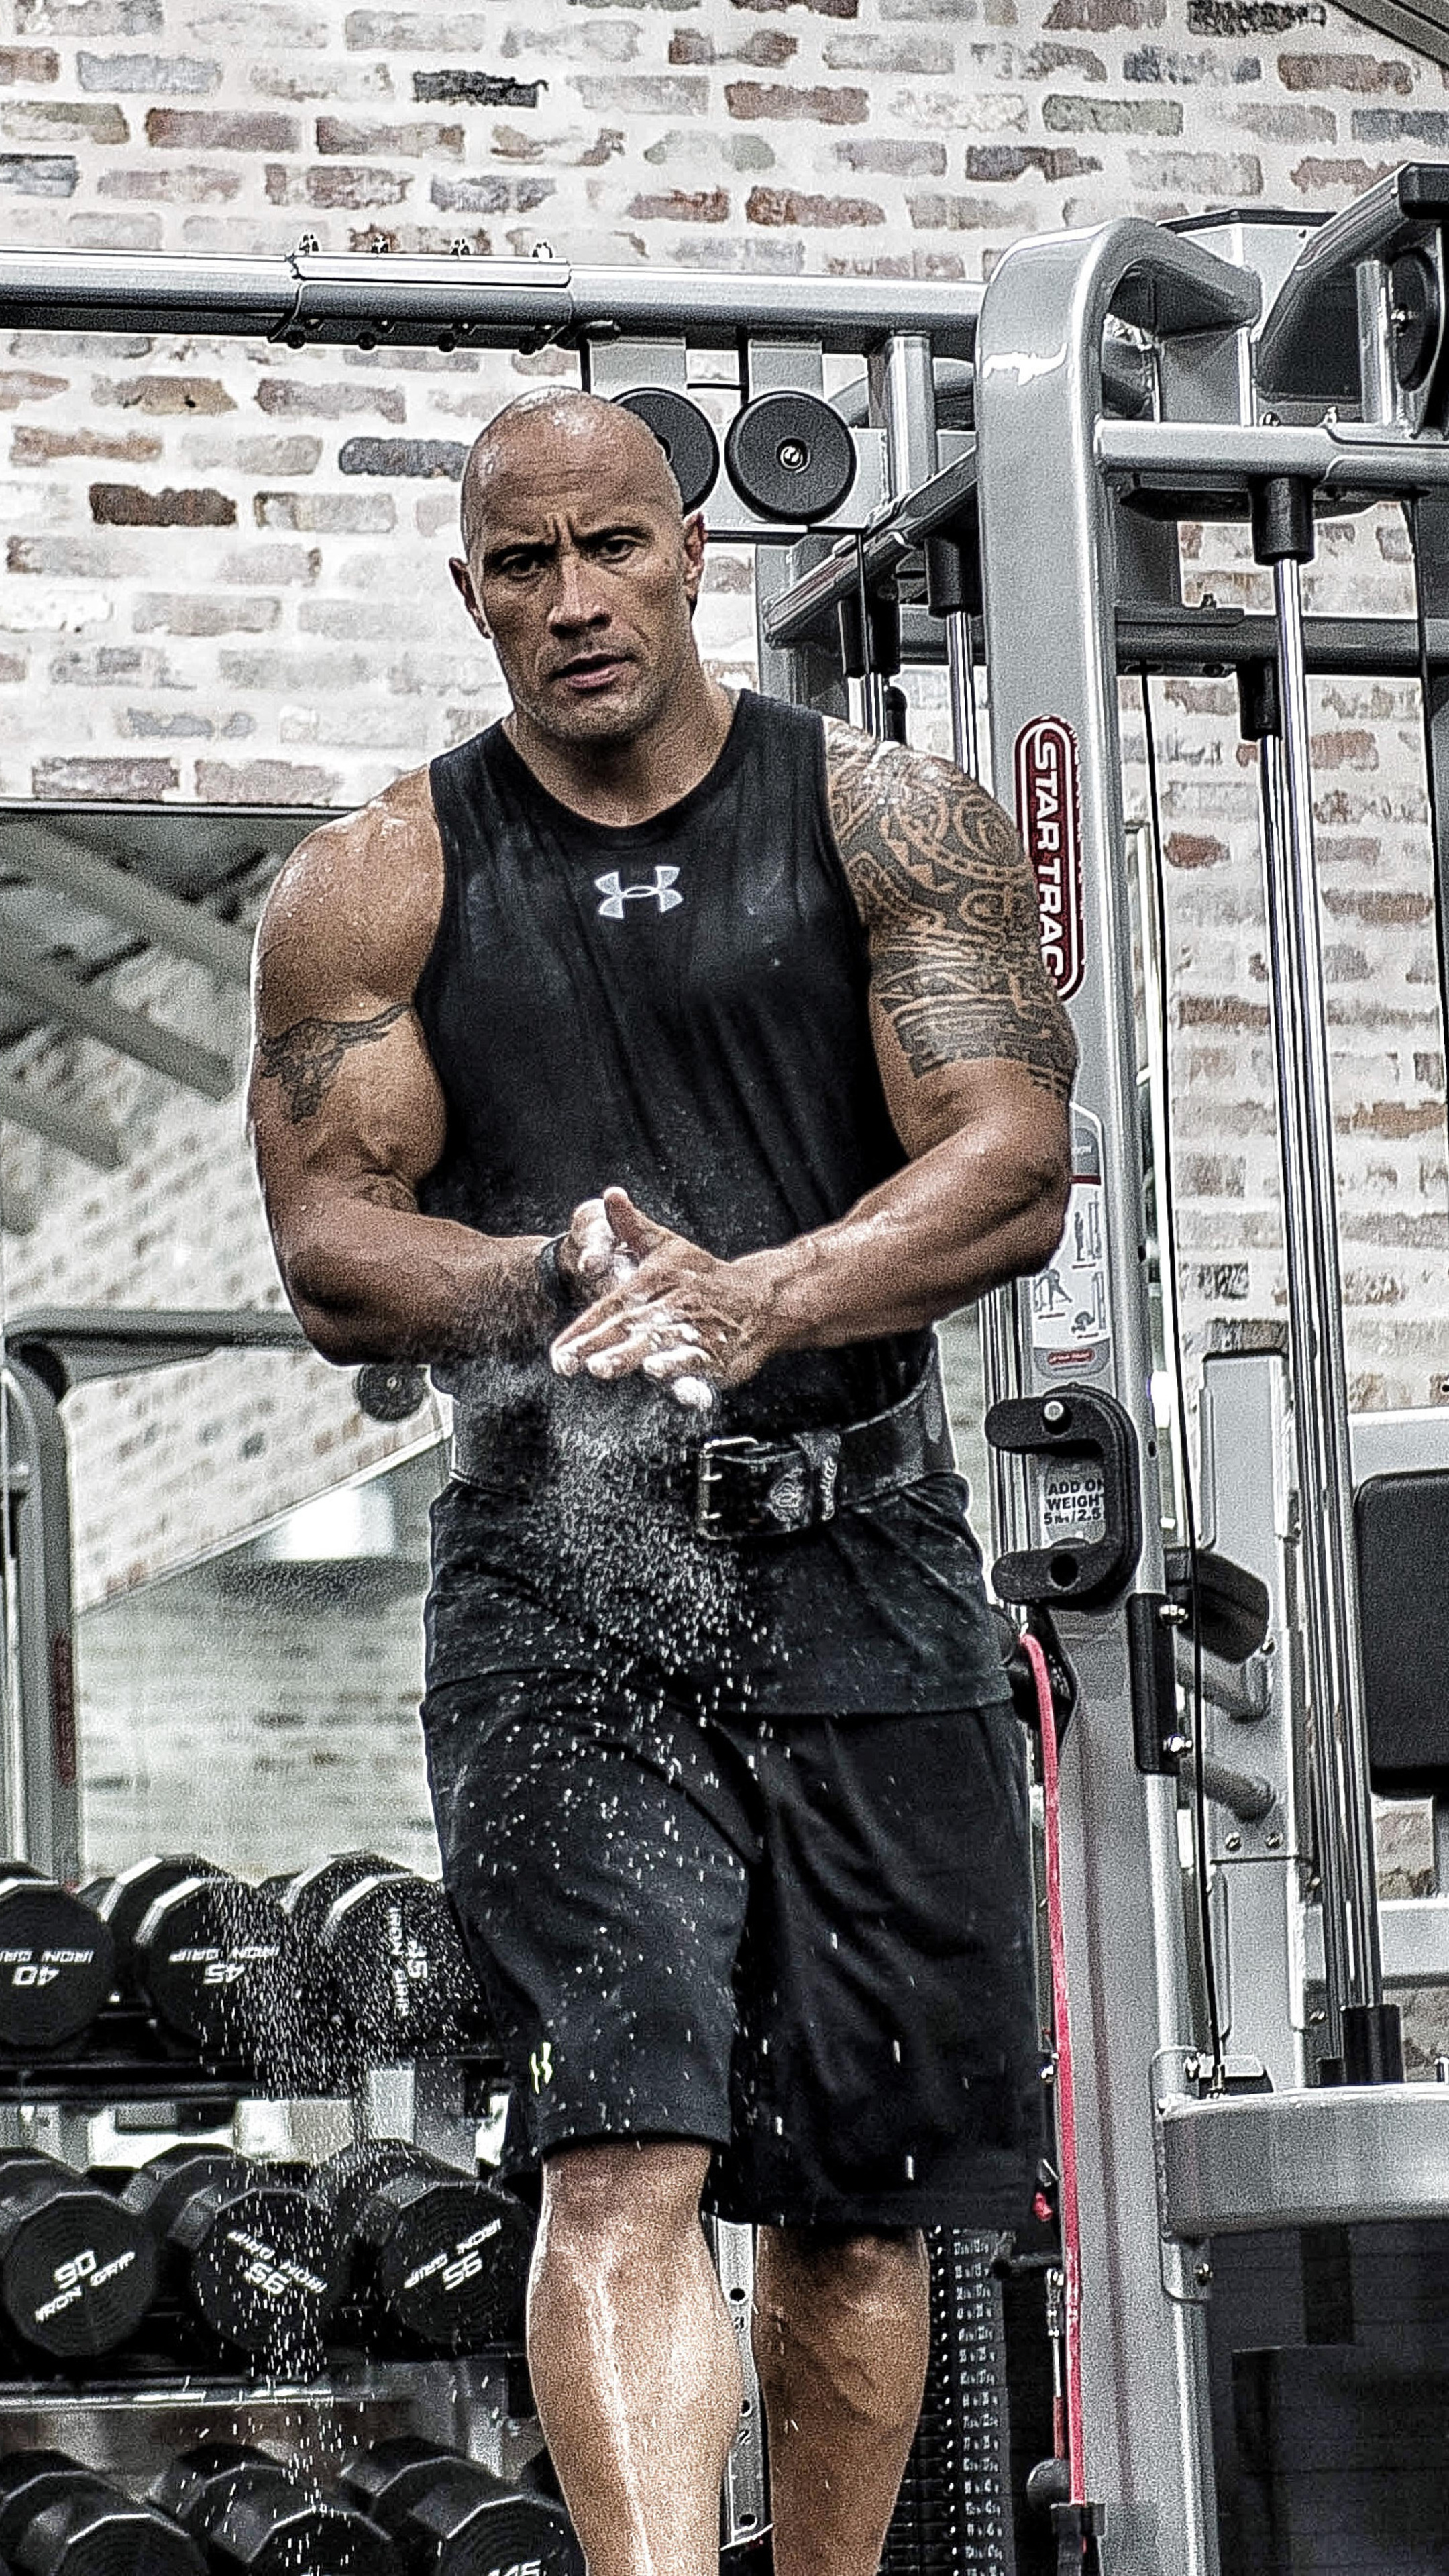 HD wallpaper, Phone 4K Fitness Background Image, Dwayne Johnson In Gym, Fitness Motivation, Bodybuilder Physique, Sony Xperia Hd Wallpapers, 2160X3840 4K Phone